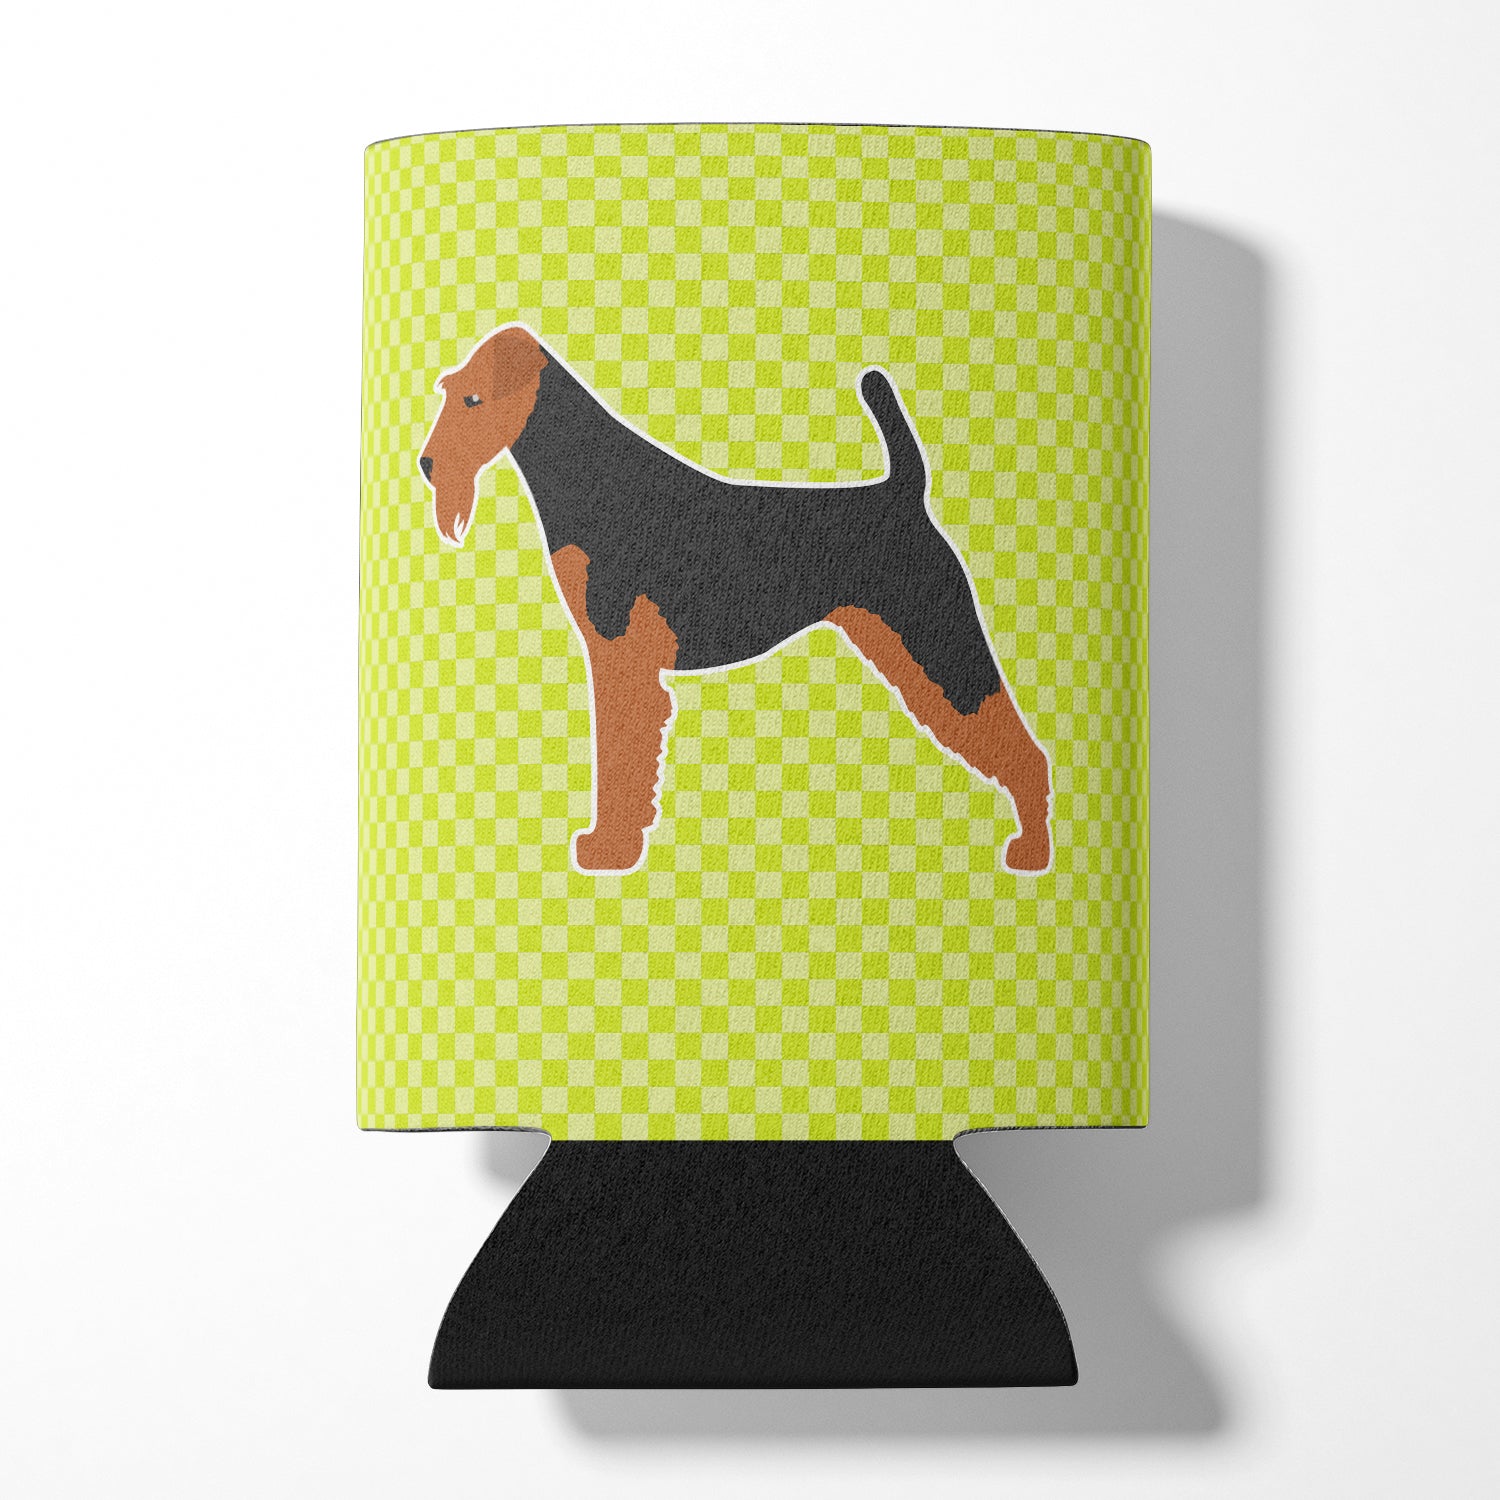 Airedale Terrier Checkerboard Vert Canette ou porte-bouteille BB3857CC